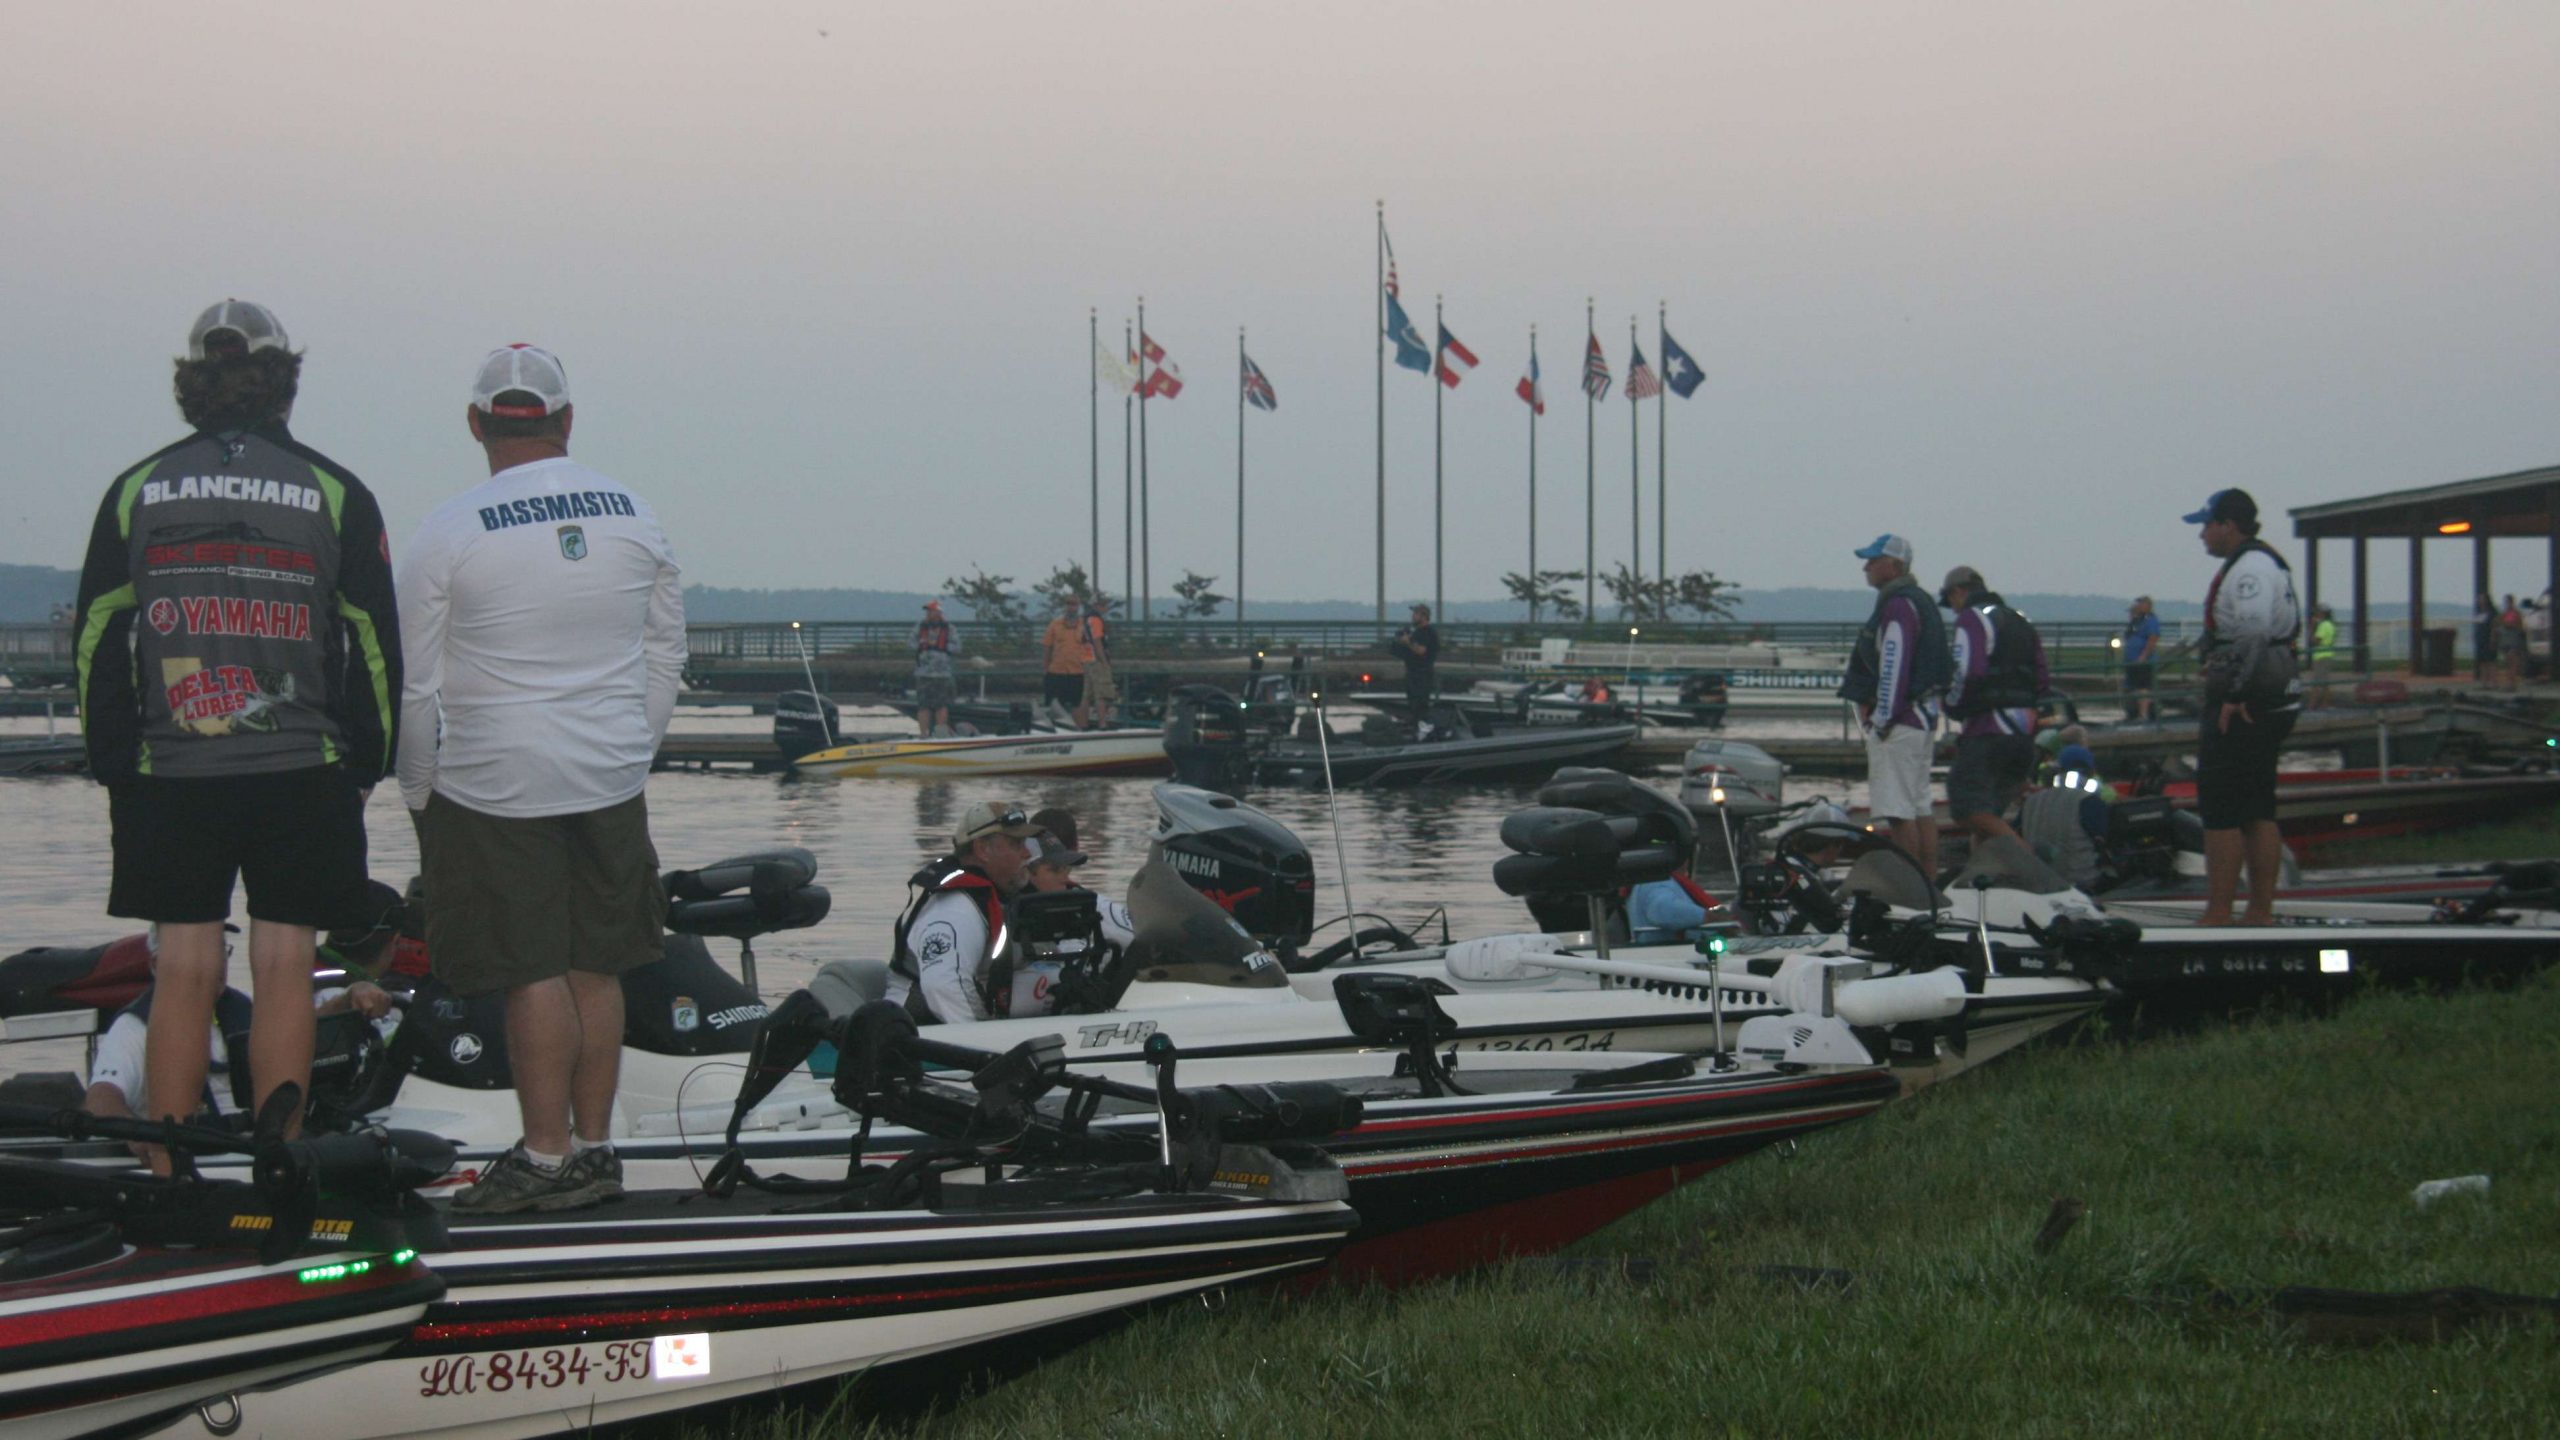 Anglers in the later flights await their number to be called.